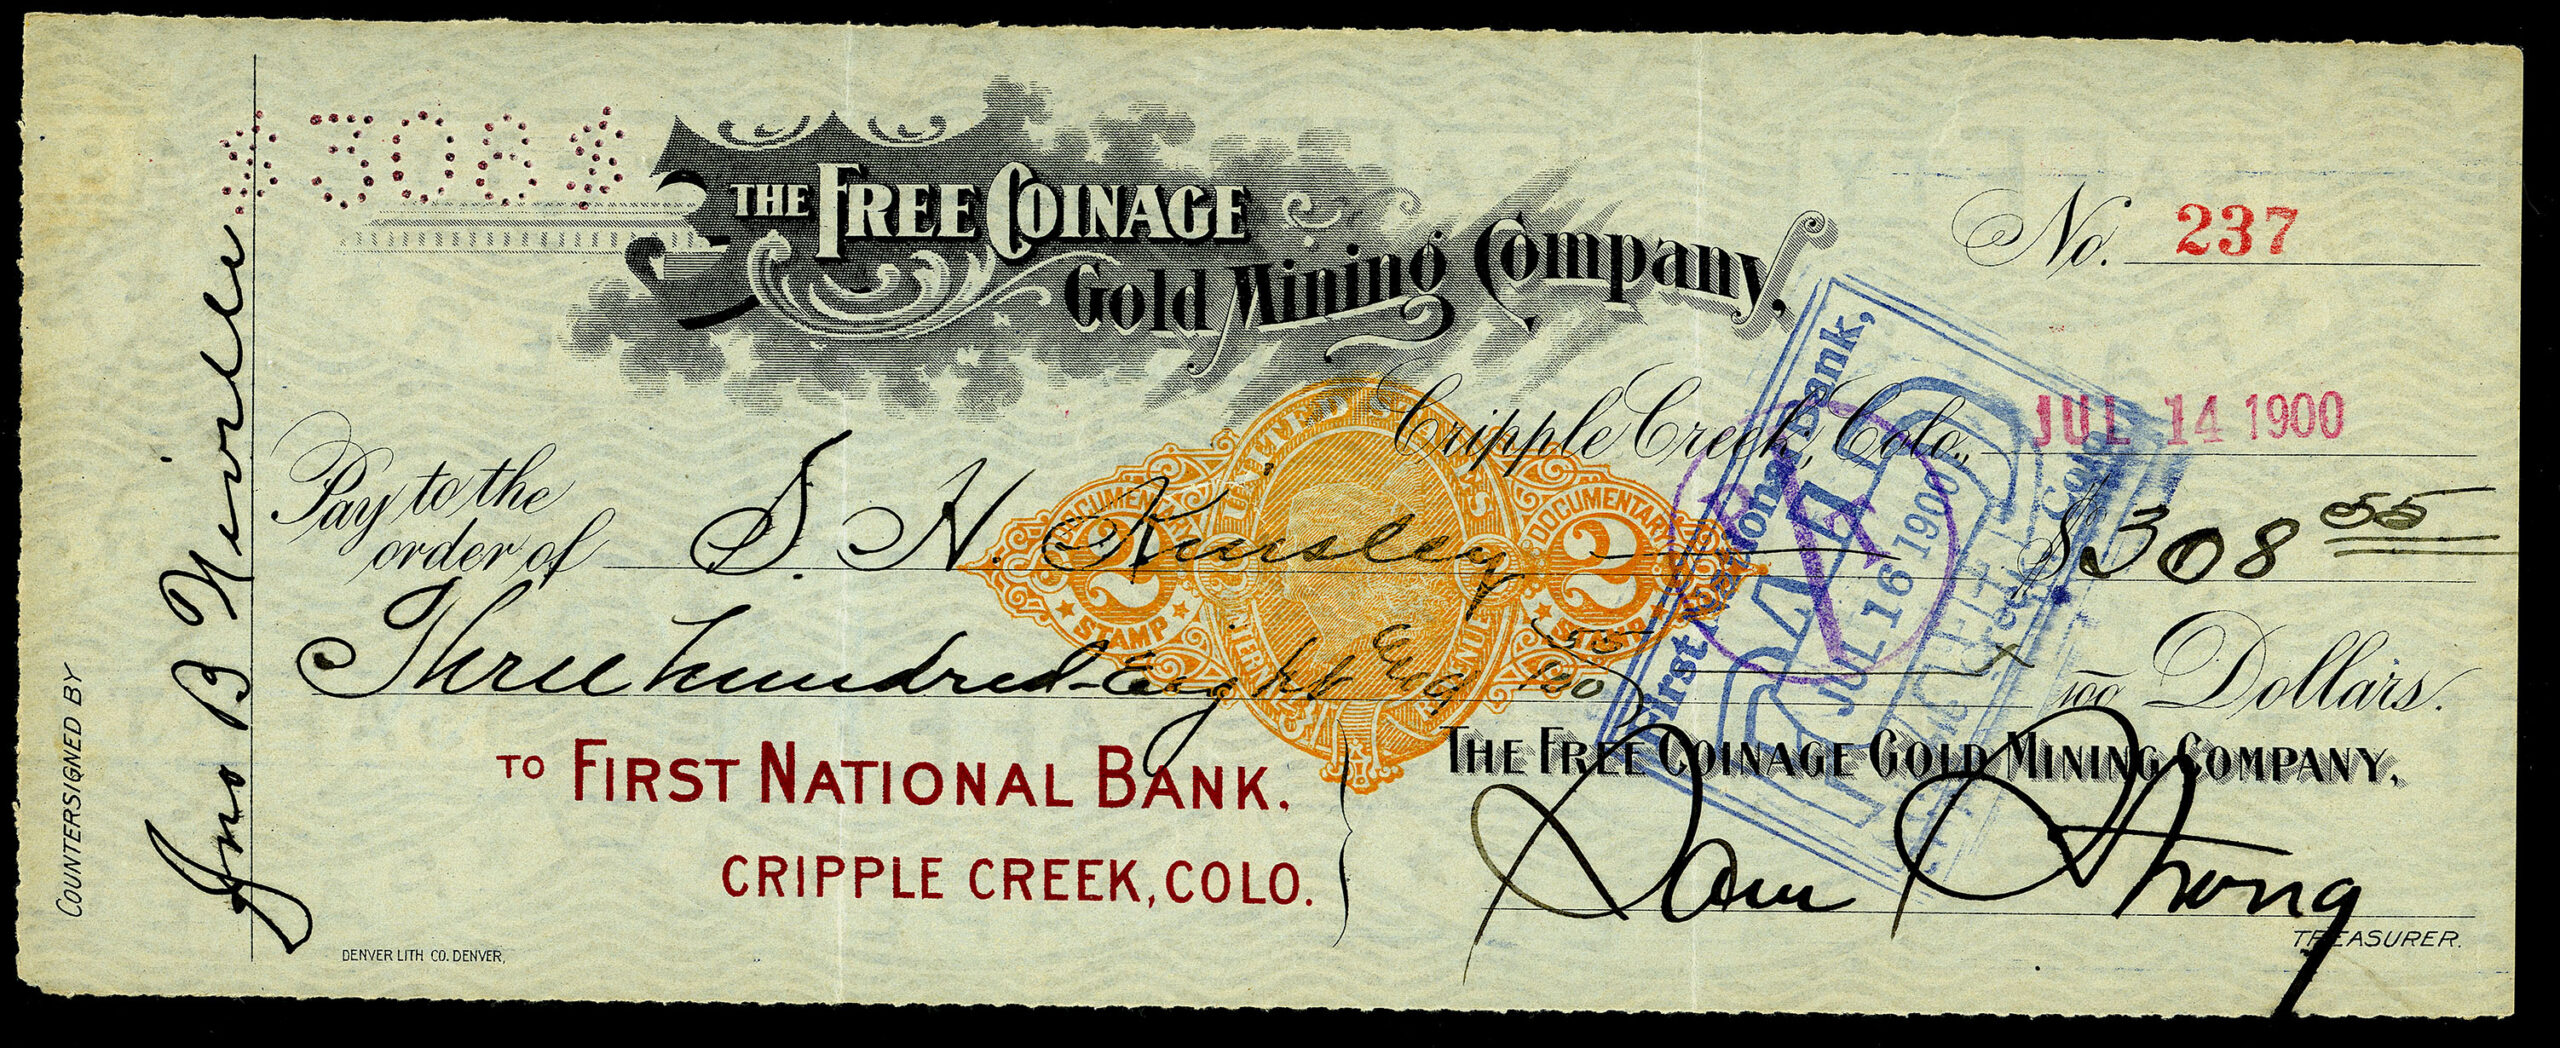 THE FREE COINAGE GOLD MINING COMPANY, Cripple Creek, Colorado, Sam Strong signed bank check, 1900, revenue imprint RN-X7